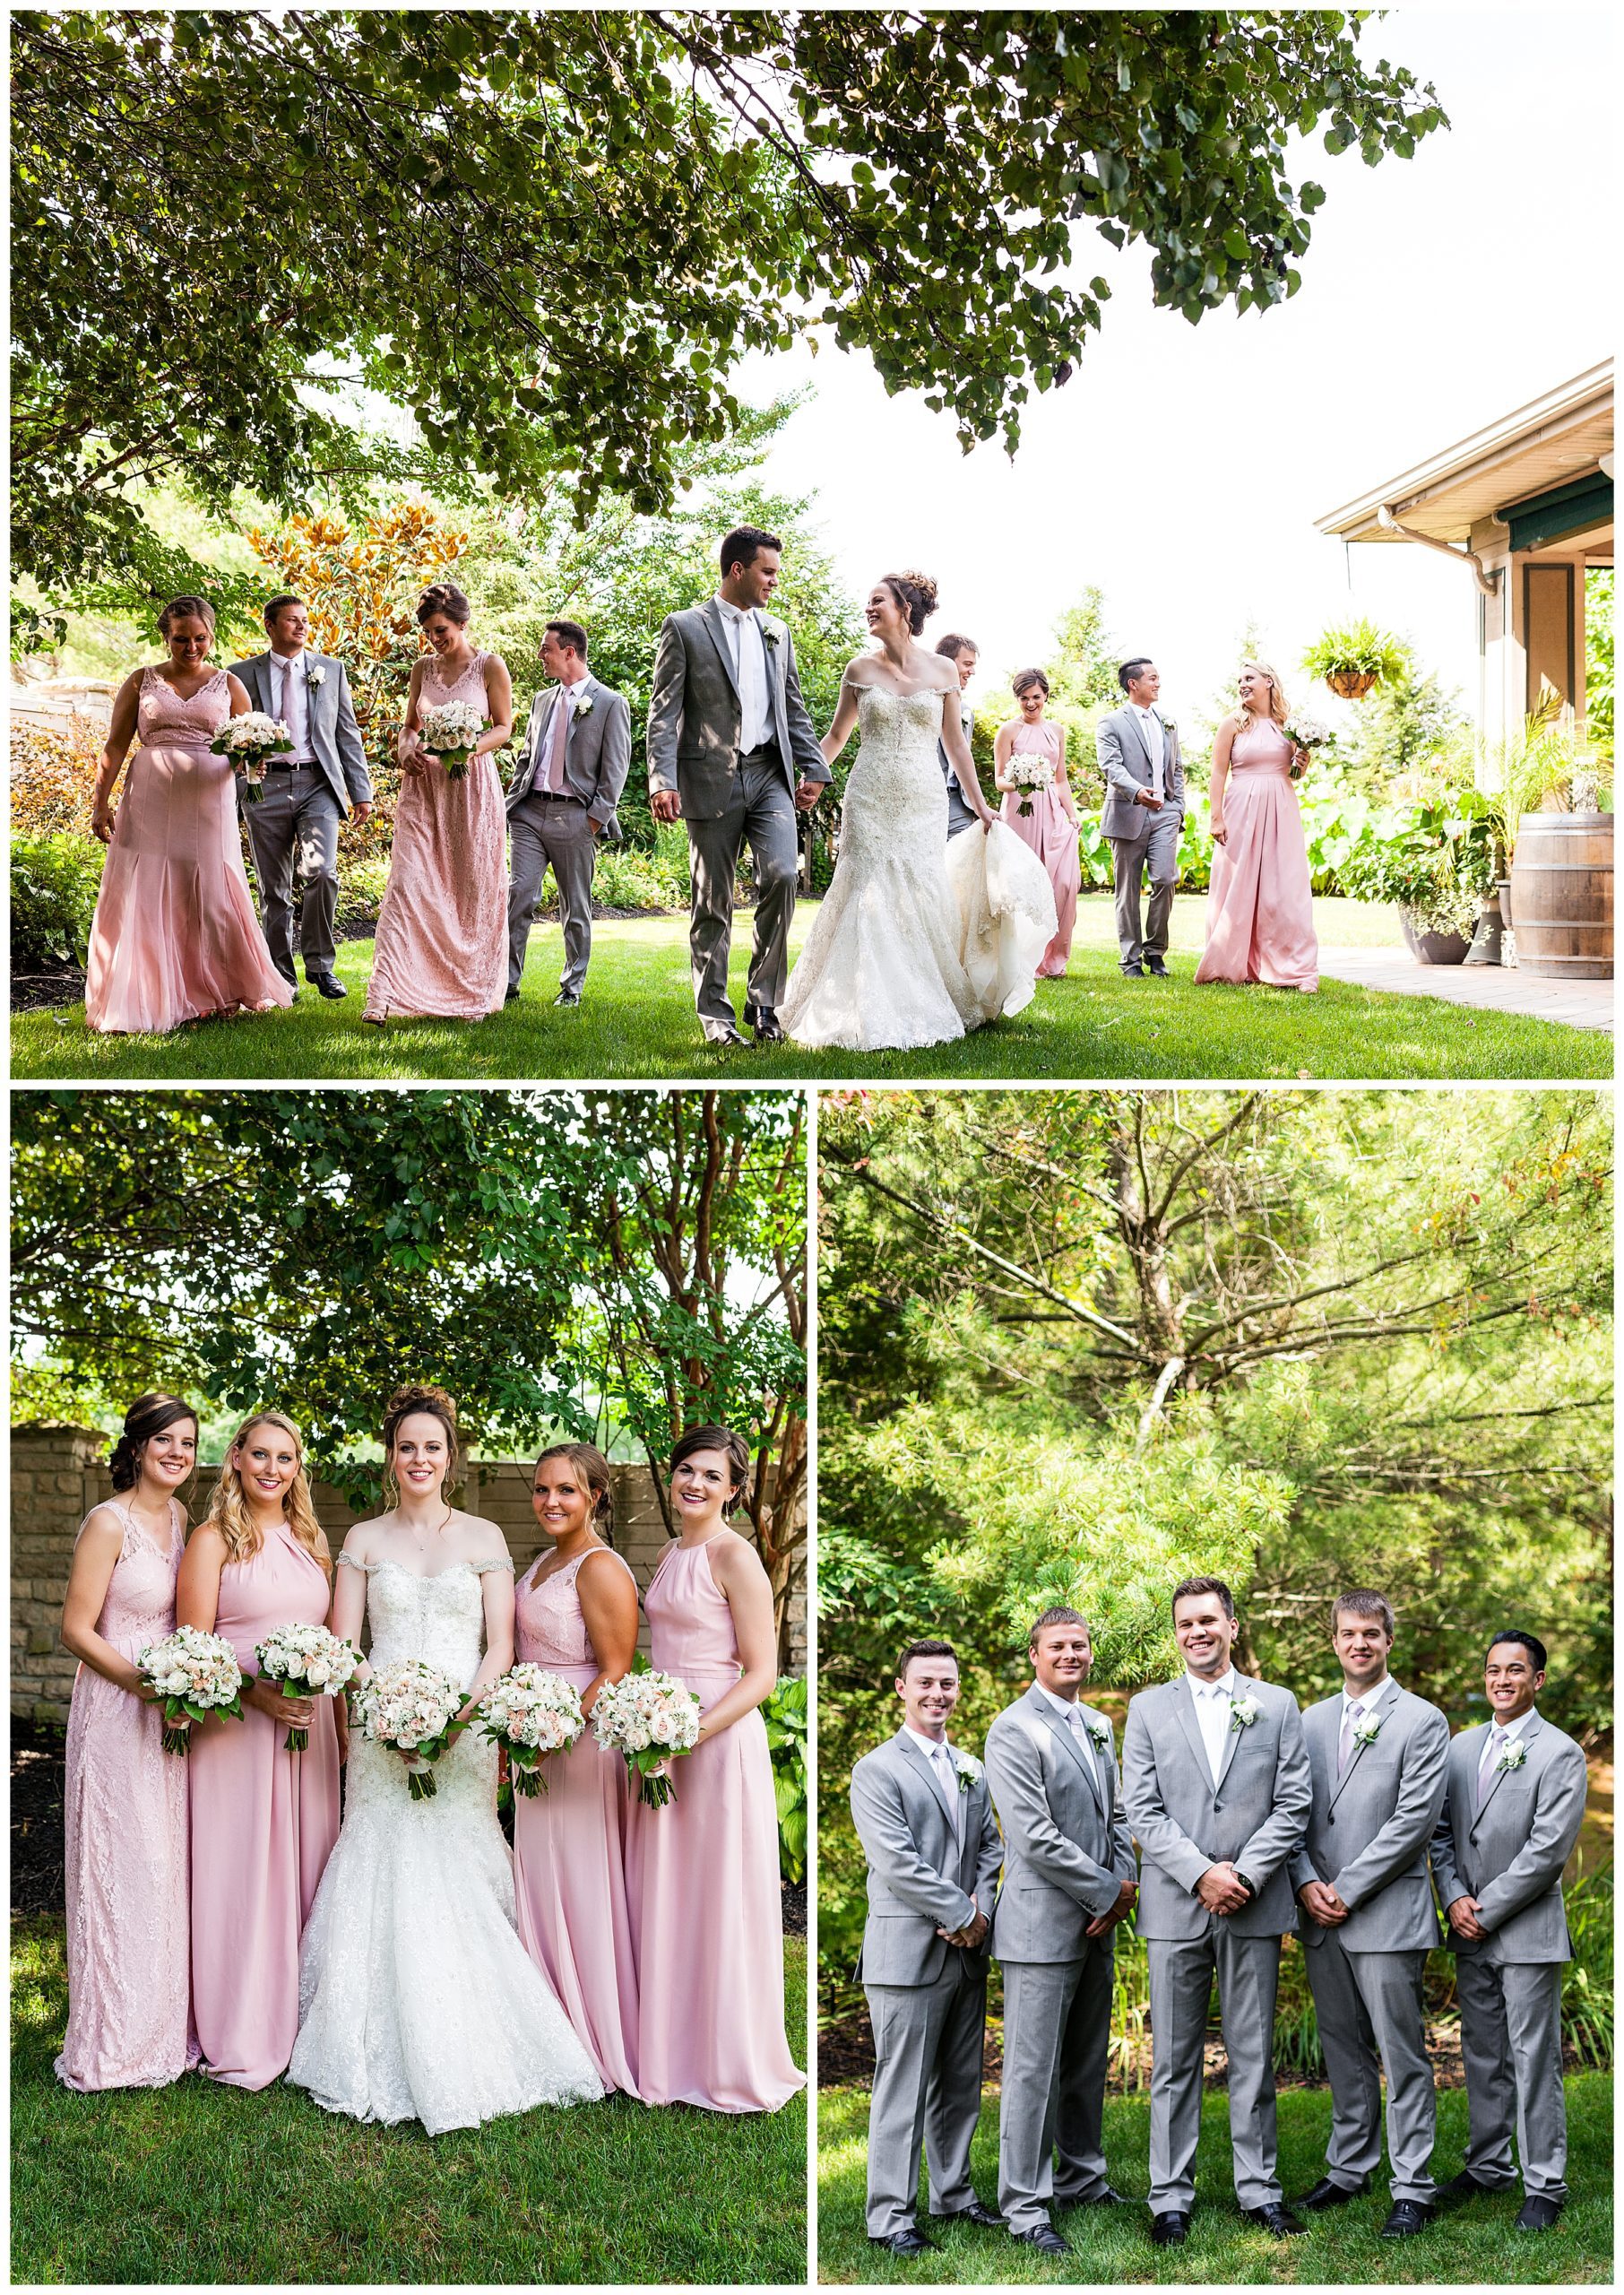 Bride and groom walk through courtyard with wedding party and traditional bridesmaids and groomsmen portrait collage